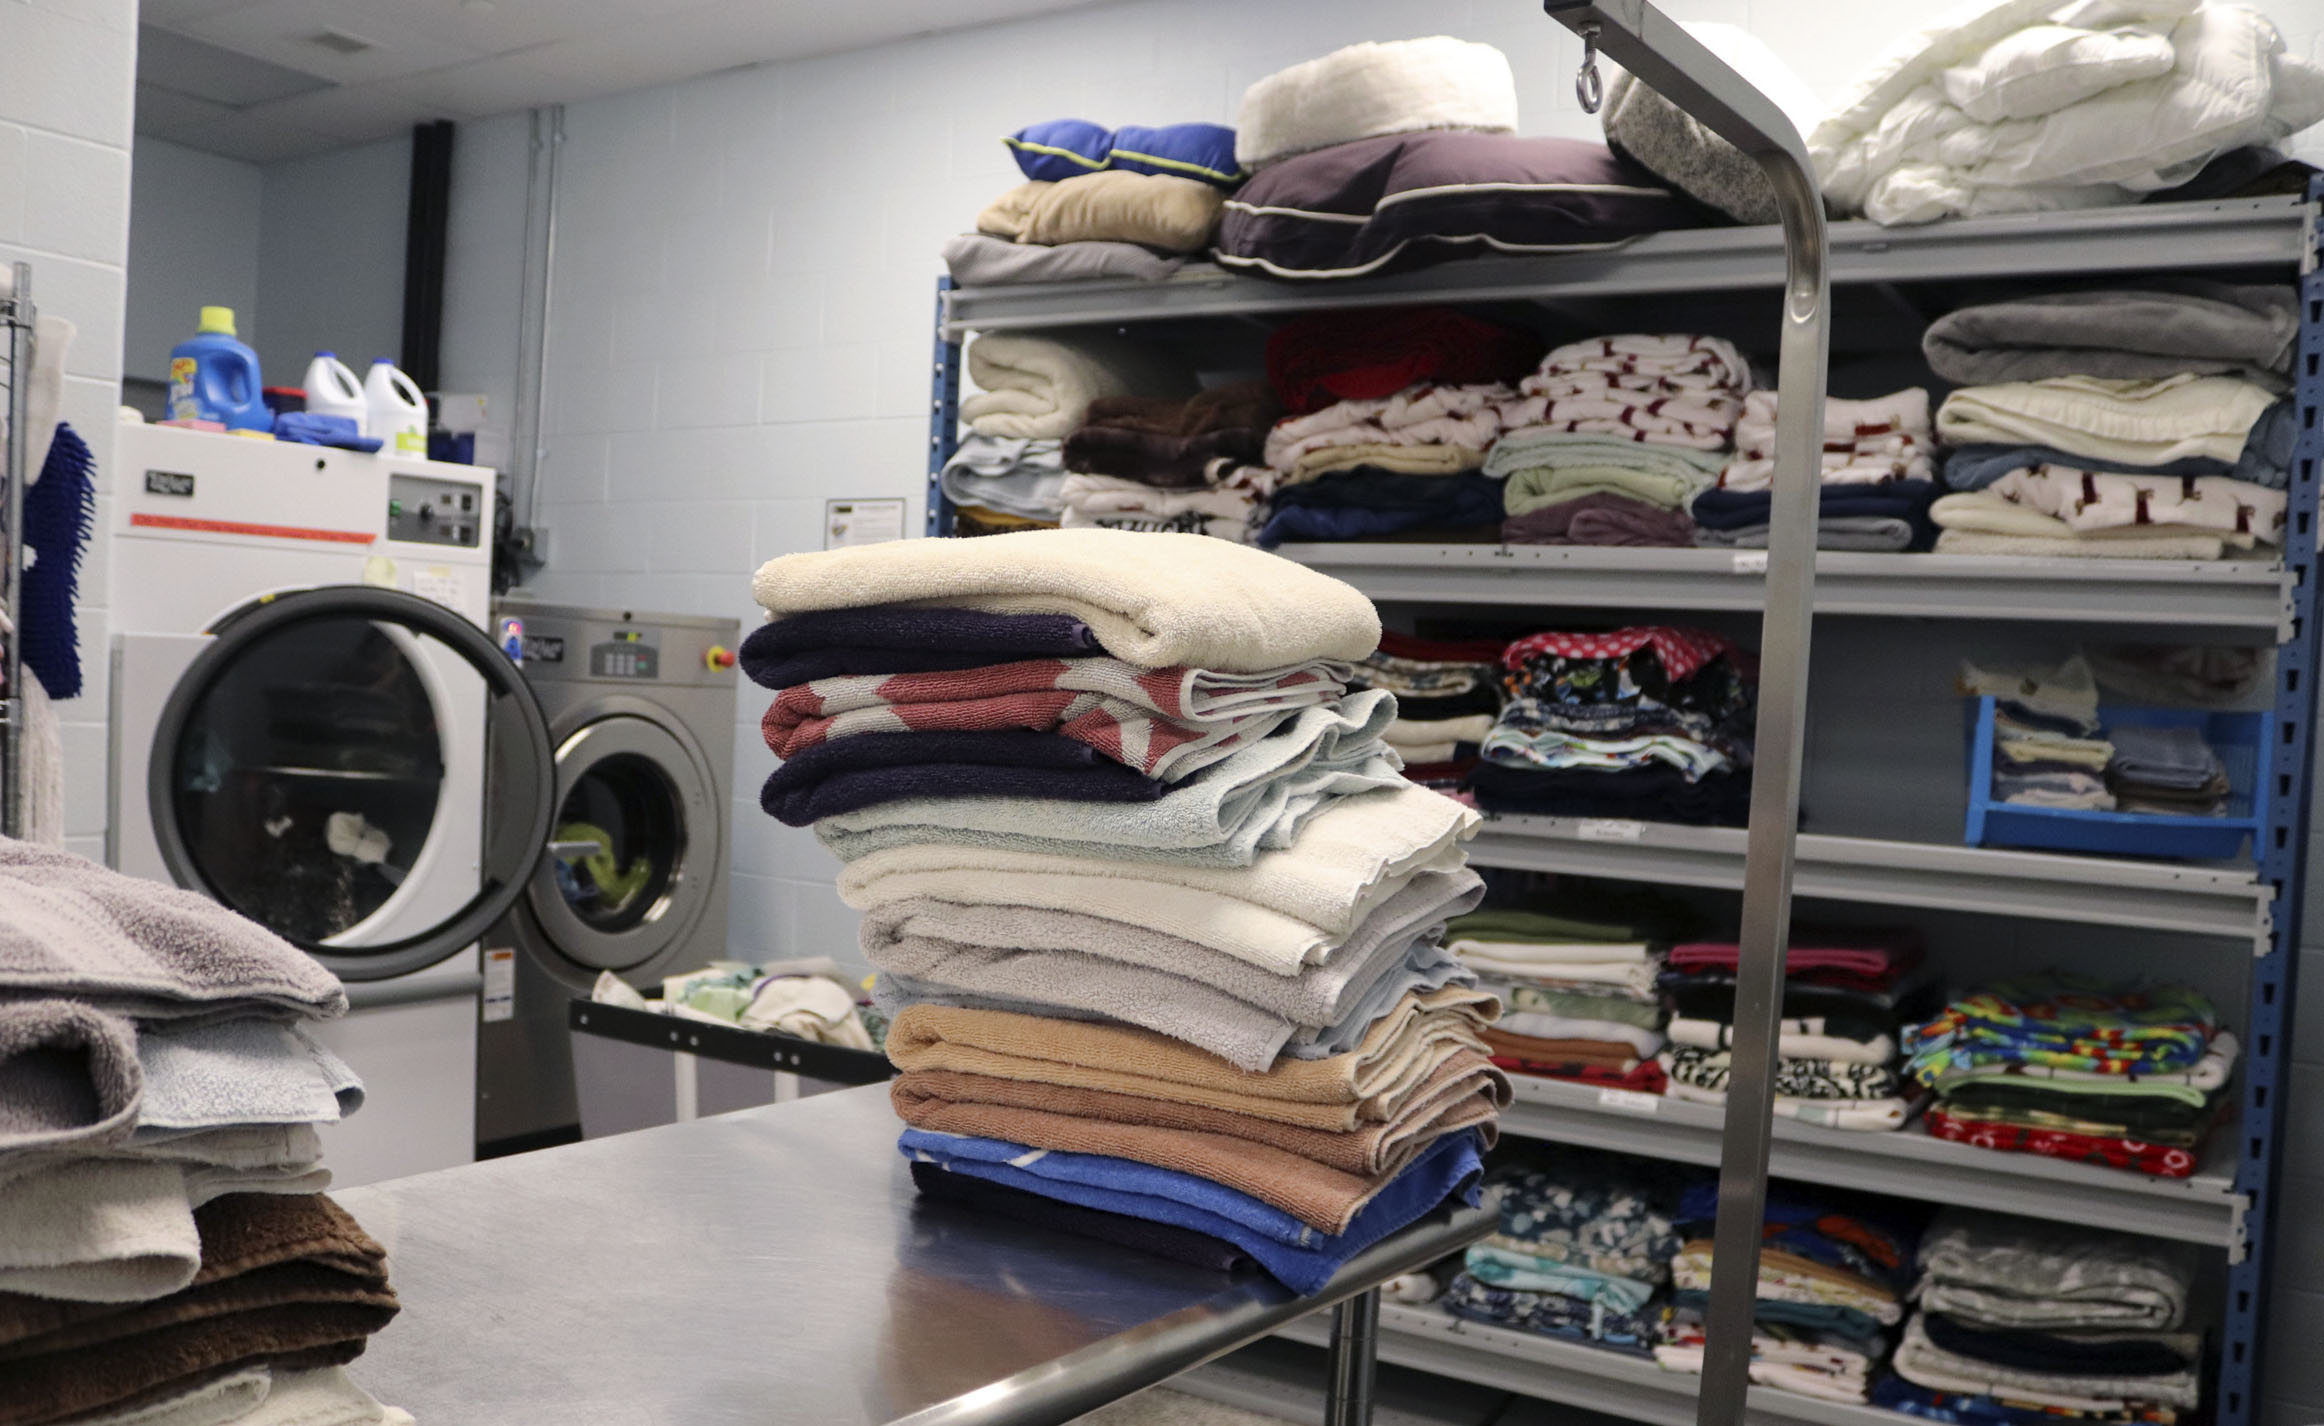 Towels sit in the laundry room on Tuesday, Aug. 23, 2022, at Charles and Lynn Zhang Animal Care & Resource Center in Kalamazoo.